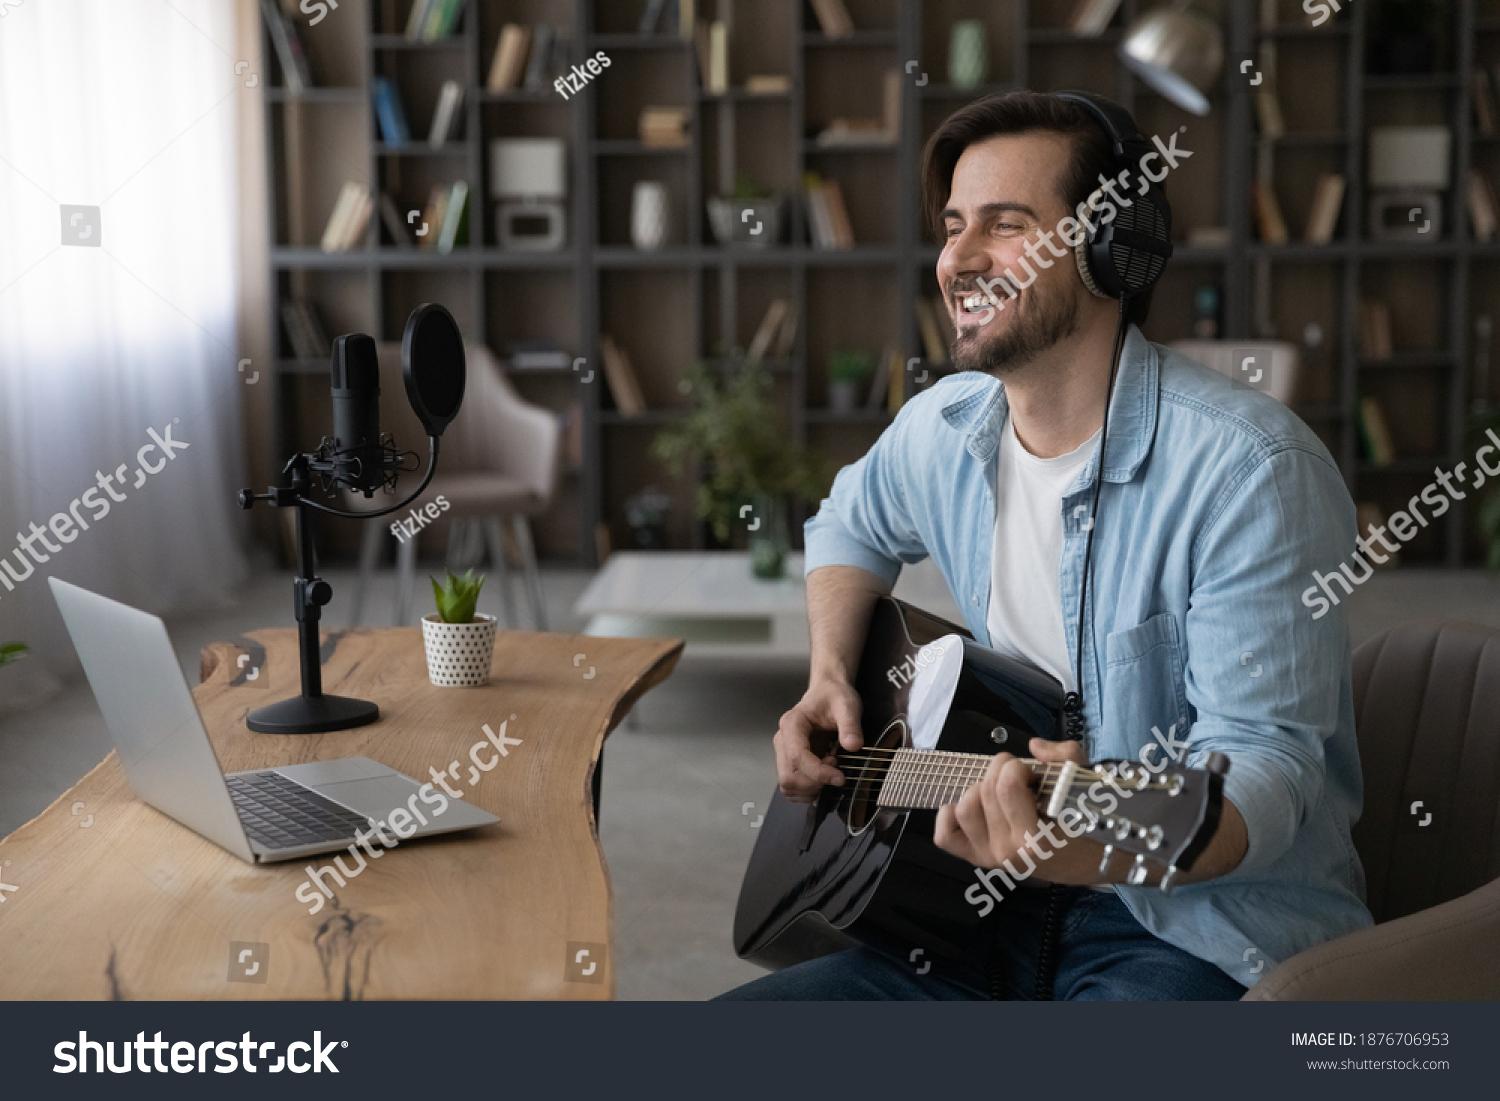 Wide banner view of happy millennial male artist hold guitar take online video webcam lesson on computer. Smiling young man singer or composer use instrument watch music tutorial on laptop at home. #1876706953